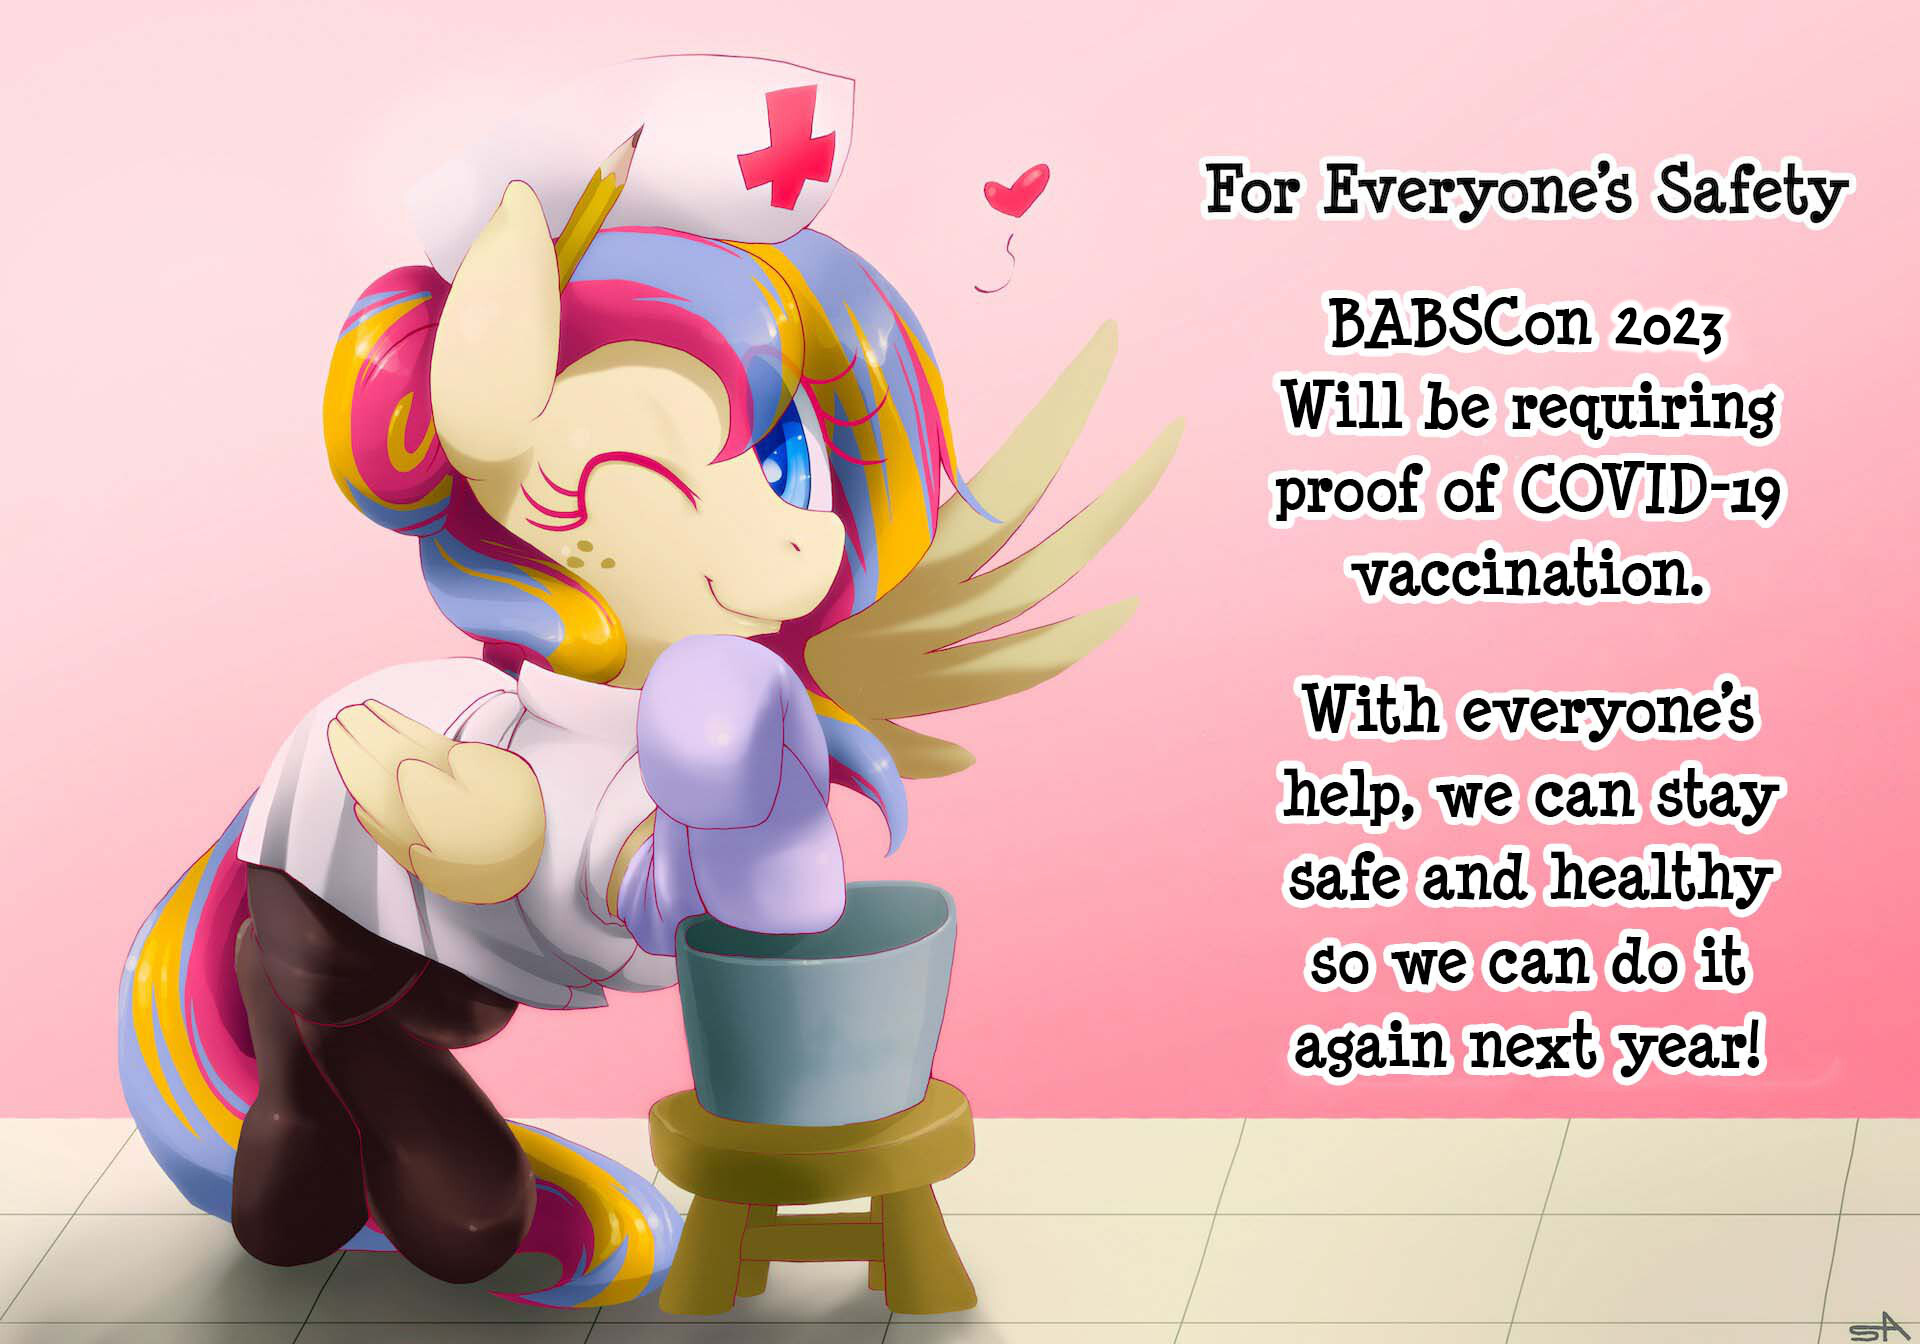 BABSCon 2024: Proof of Vaccination Required to Keep Everyone Safe!